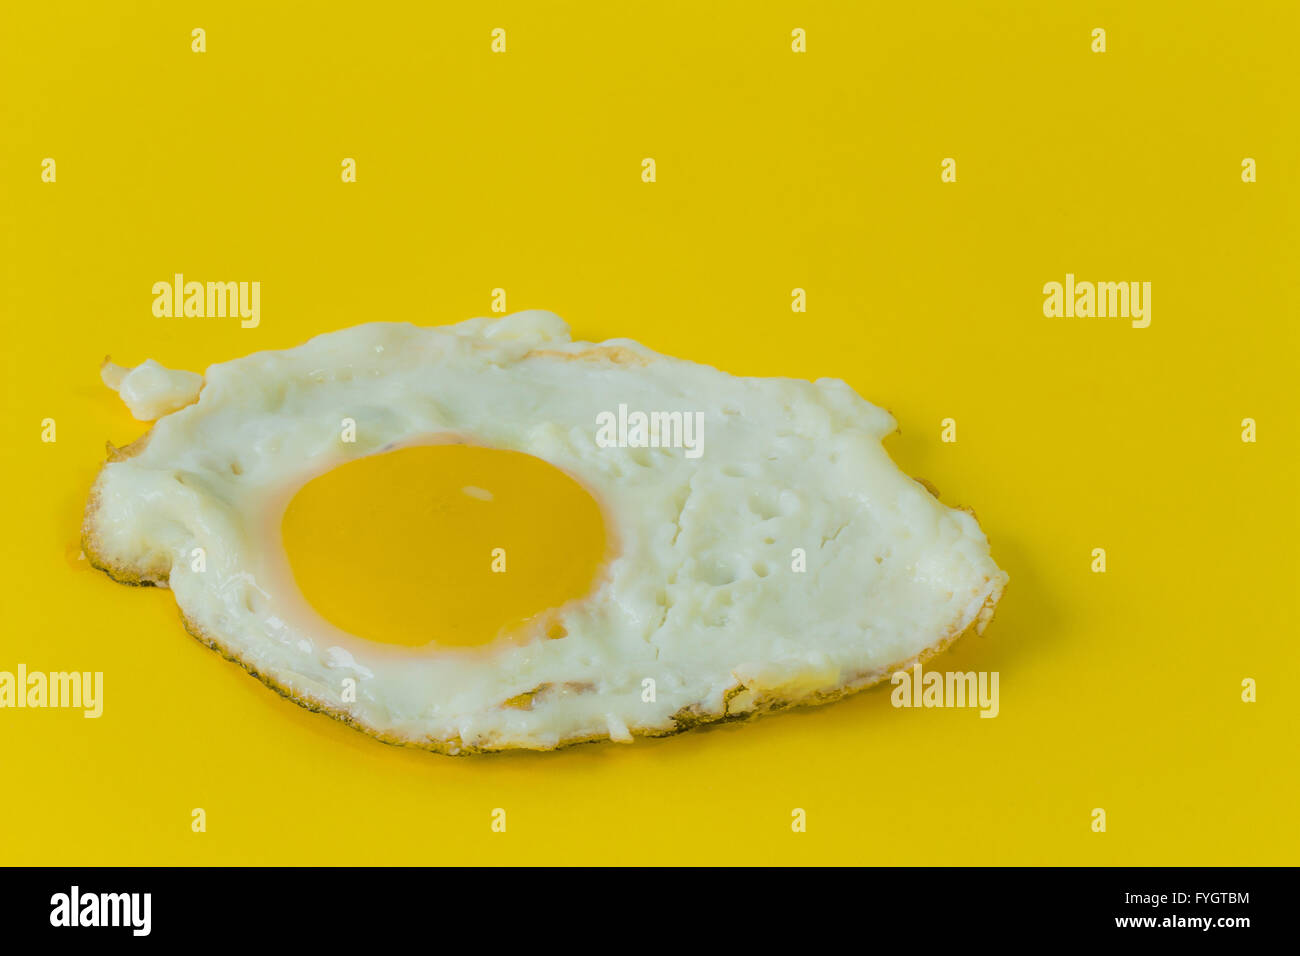 fried egg with lacy brown edges on yellow background Stock Photo